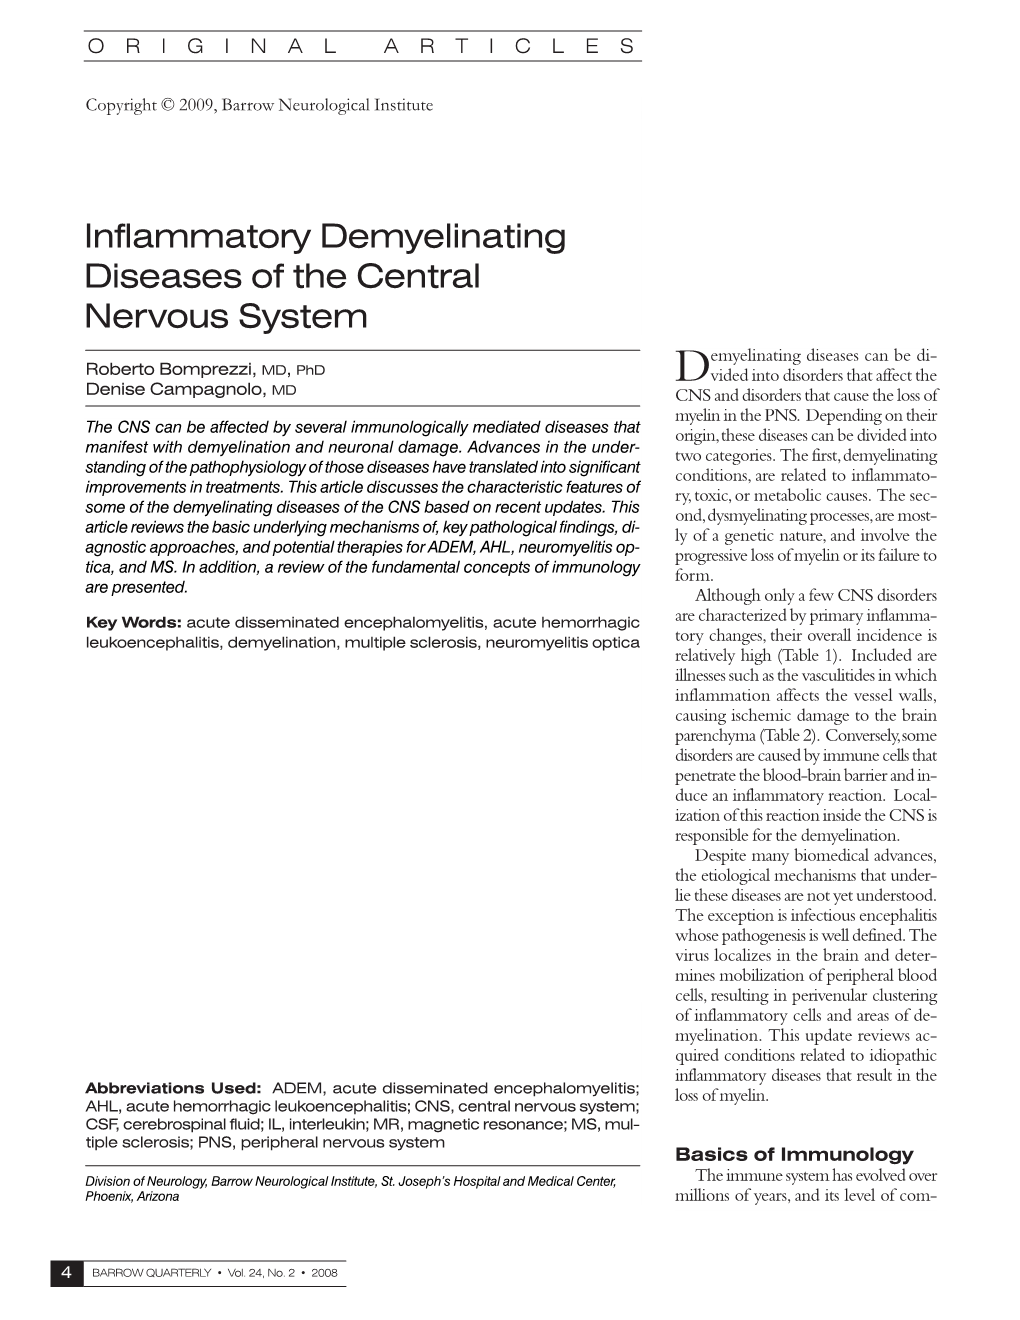 Inflammatory Demyelinating Diseases of the Central Nervous System